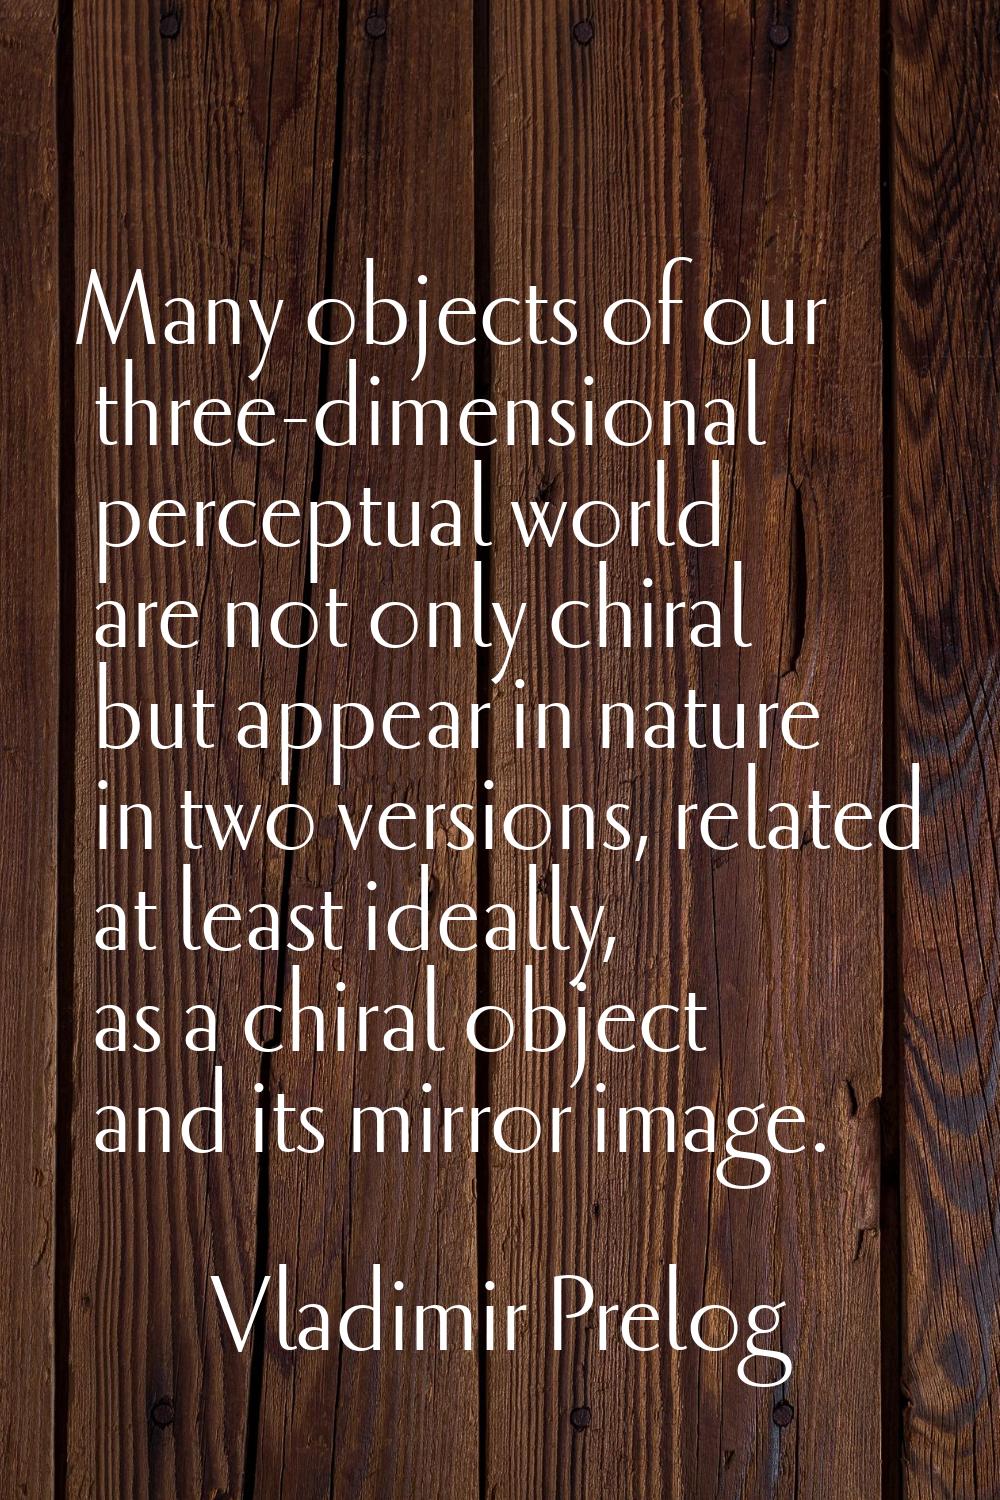 Many objects of our three-dimensional perceptual world are not only chiral but appear in nature in 